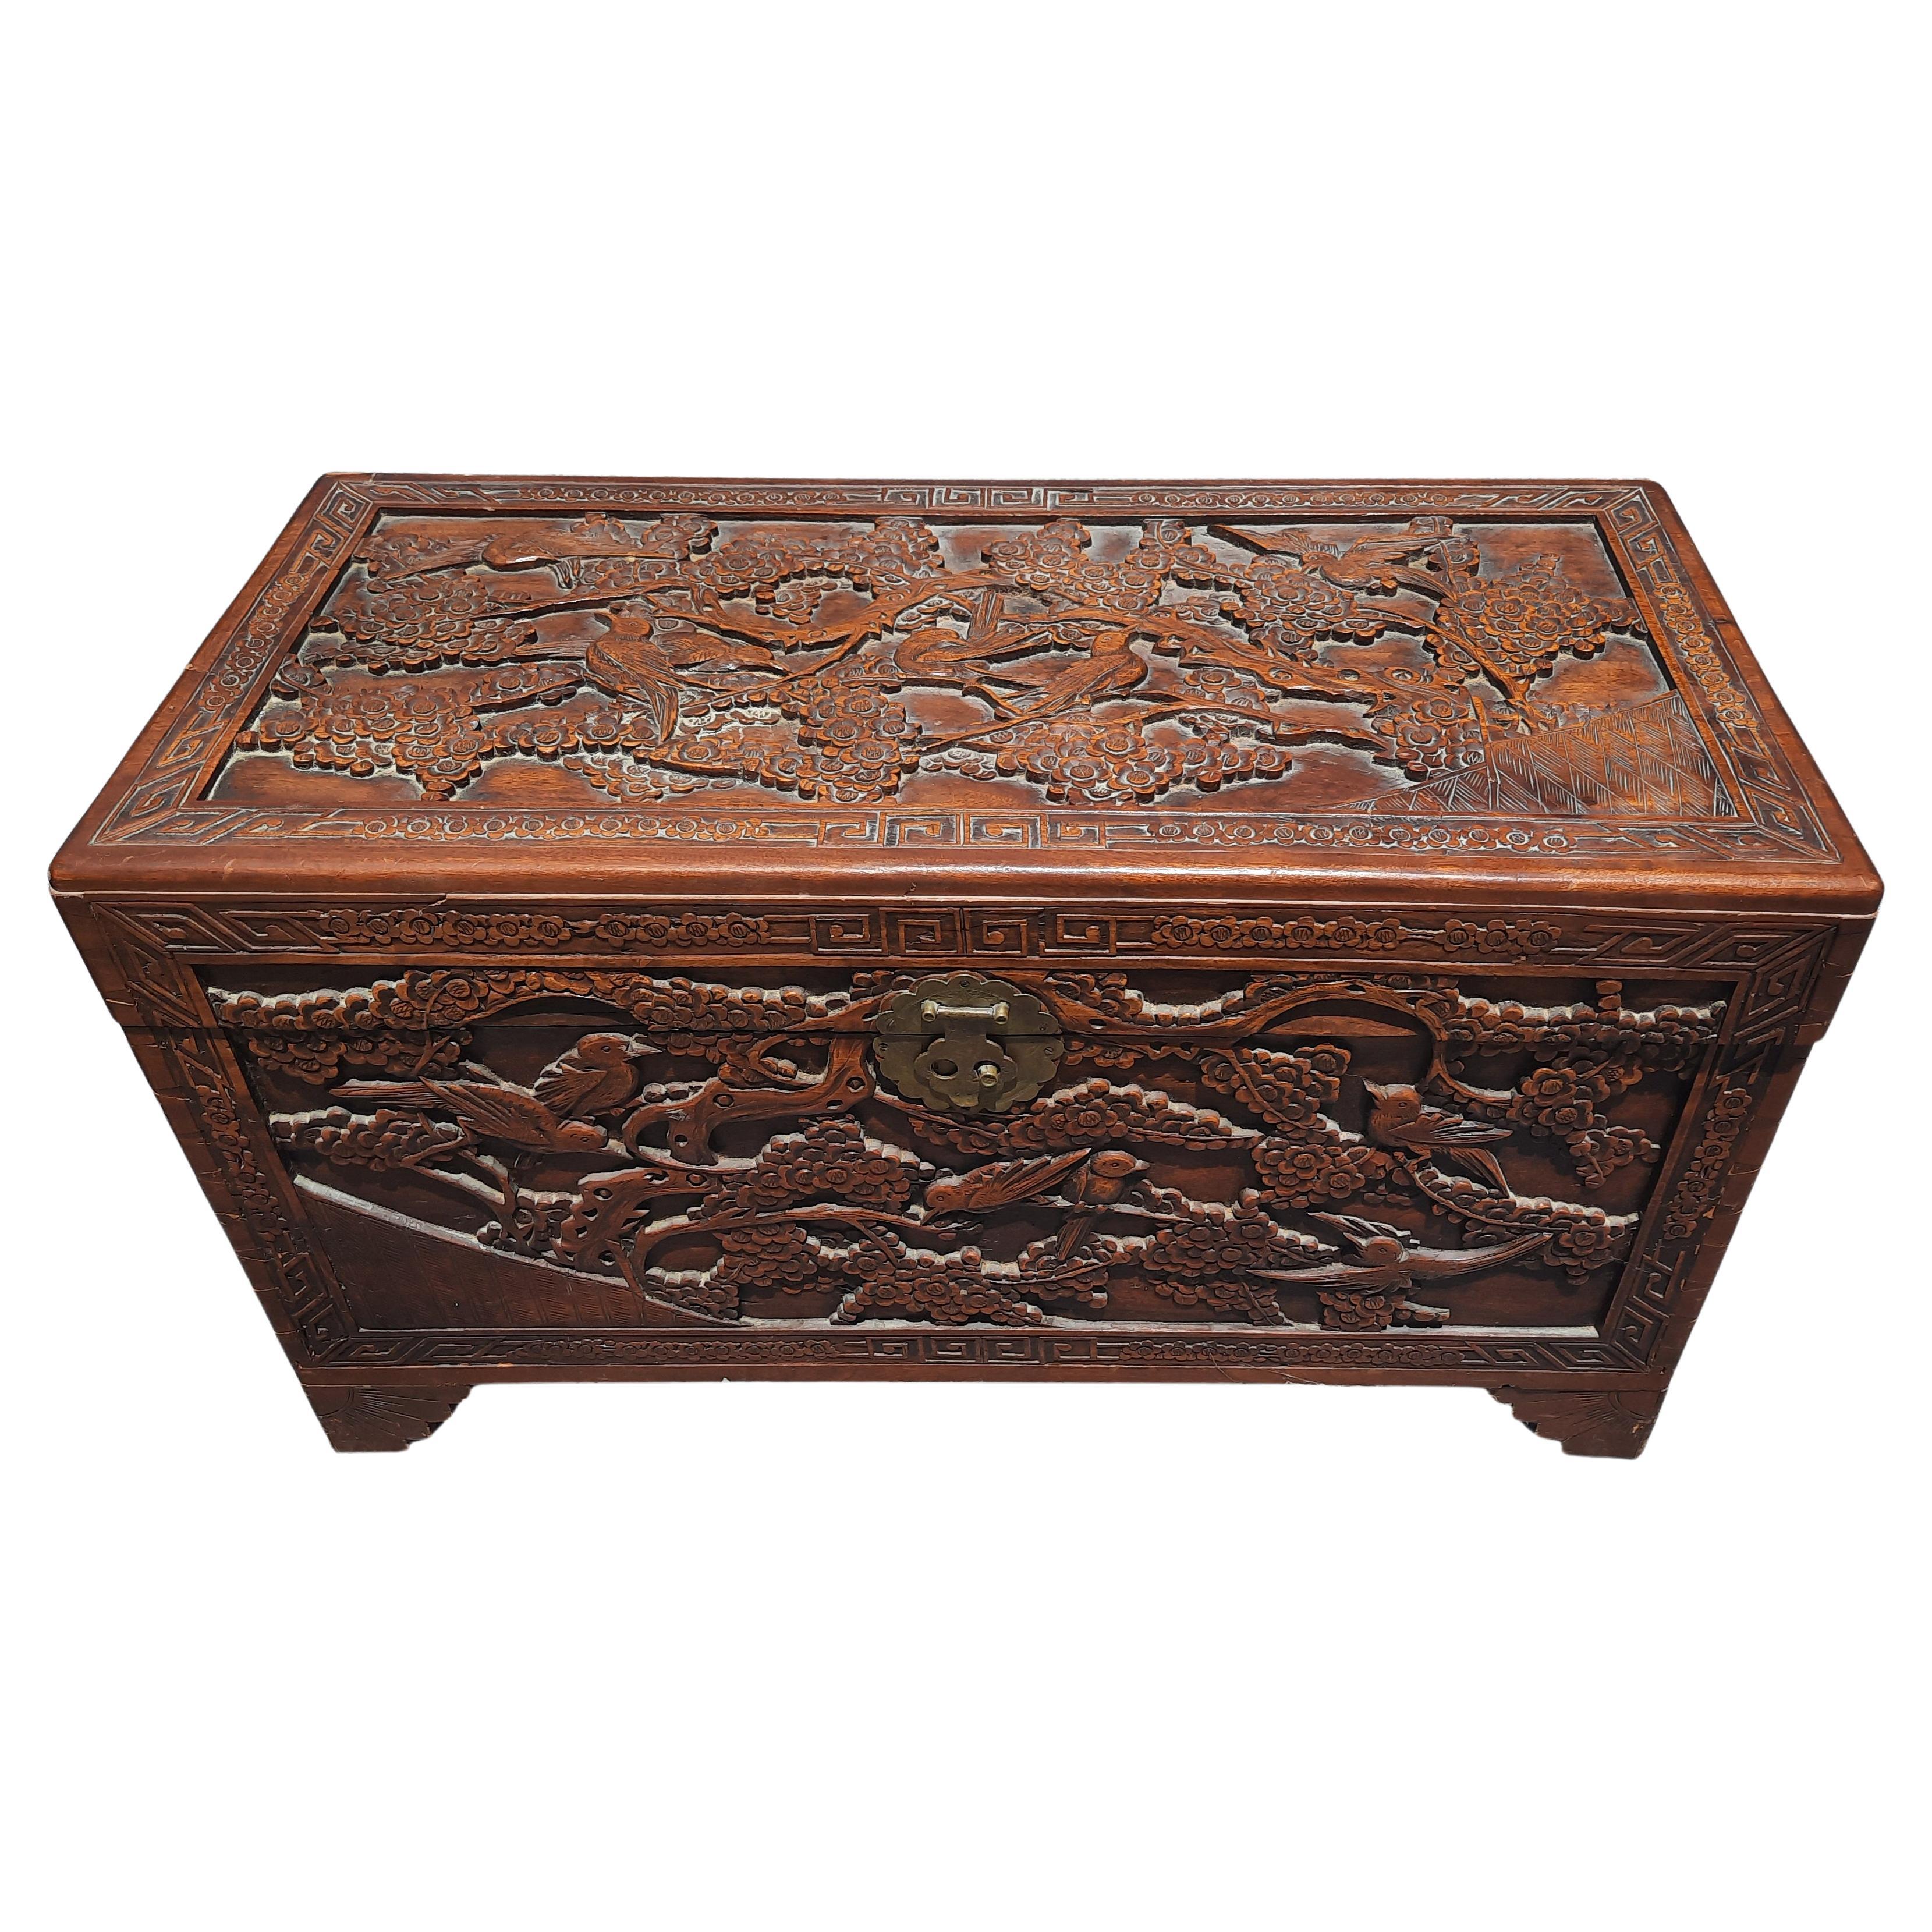 Antique heavily hand carved Asian blanket chest trunk from Hong Kong, Circa 1870s. Good vintage condition. Pad Lock Lockable
Measures 41